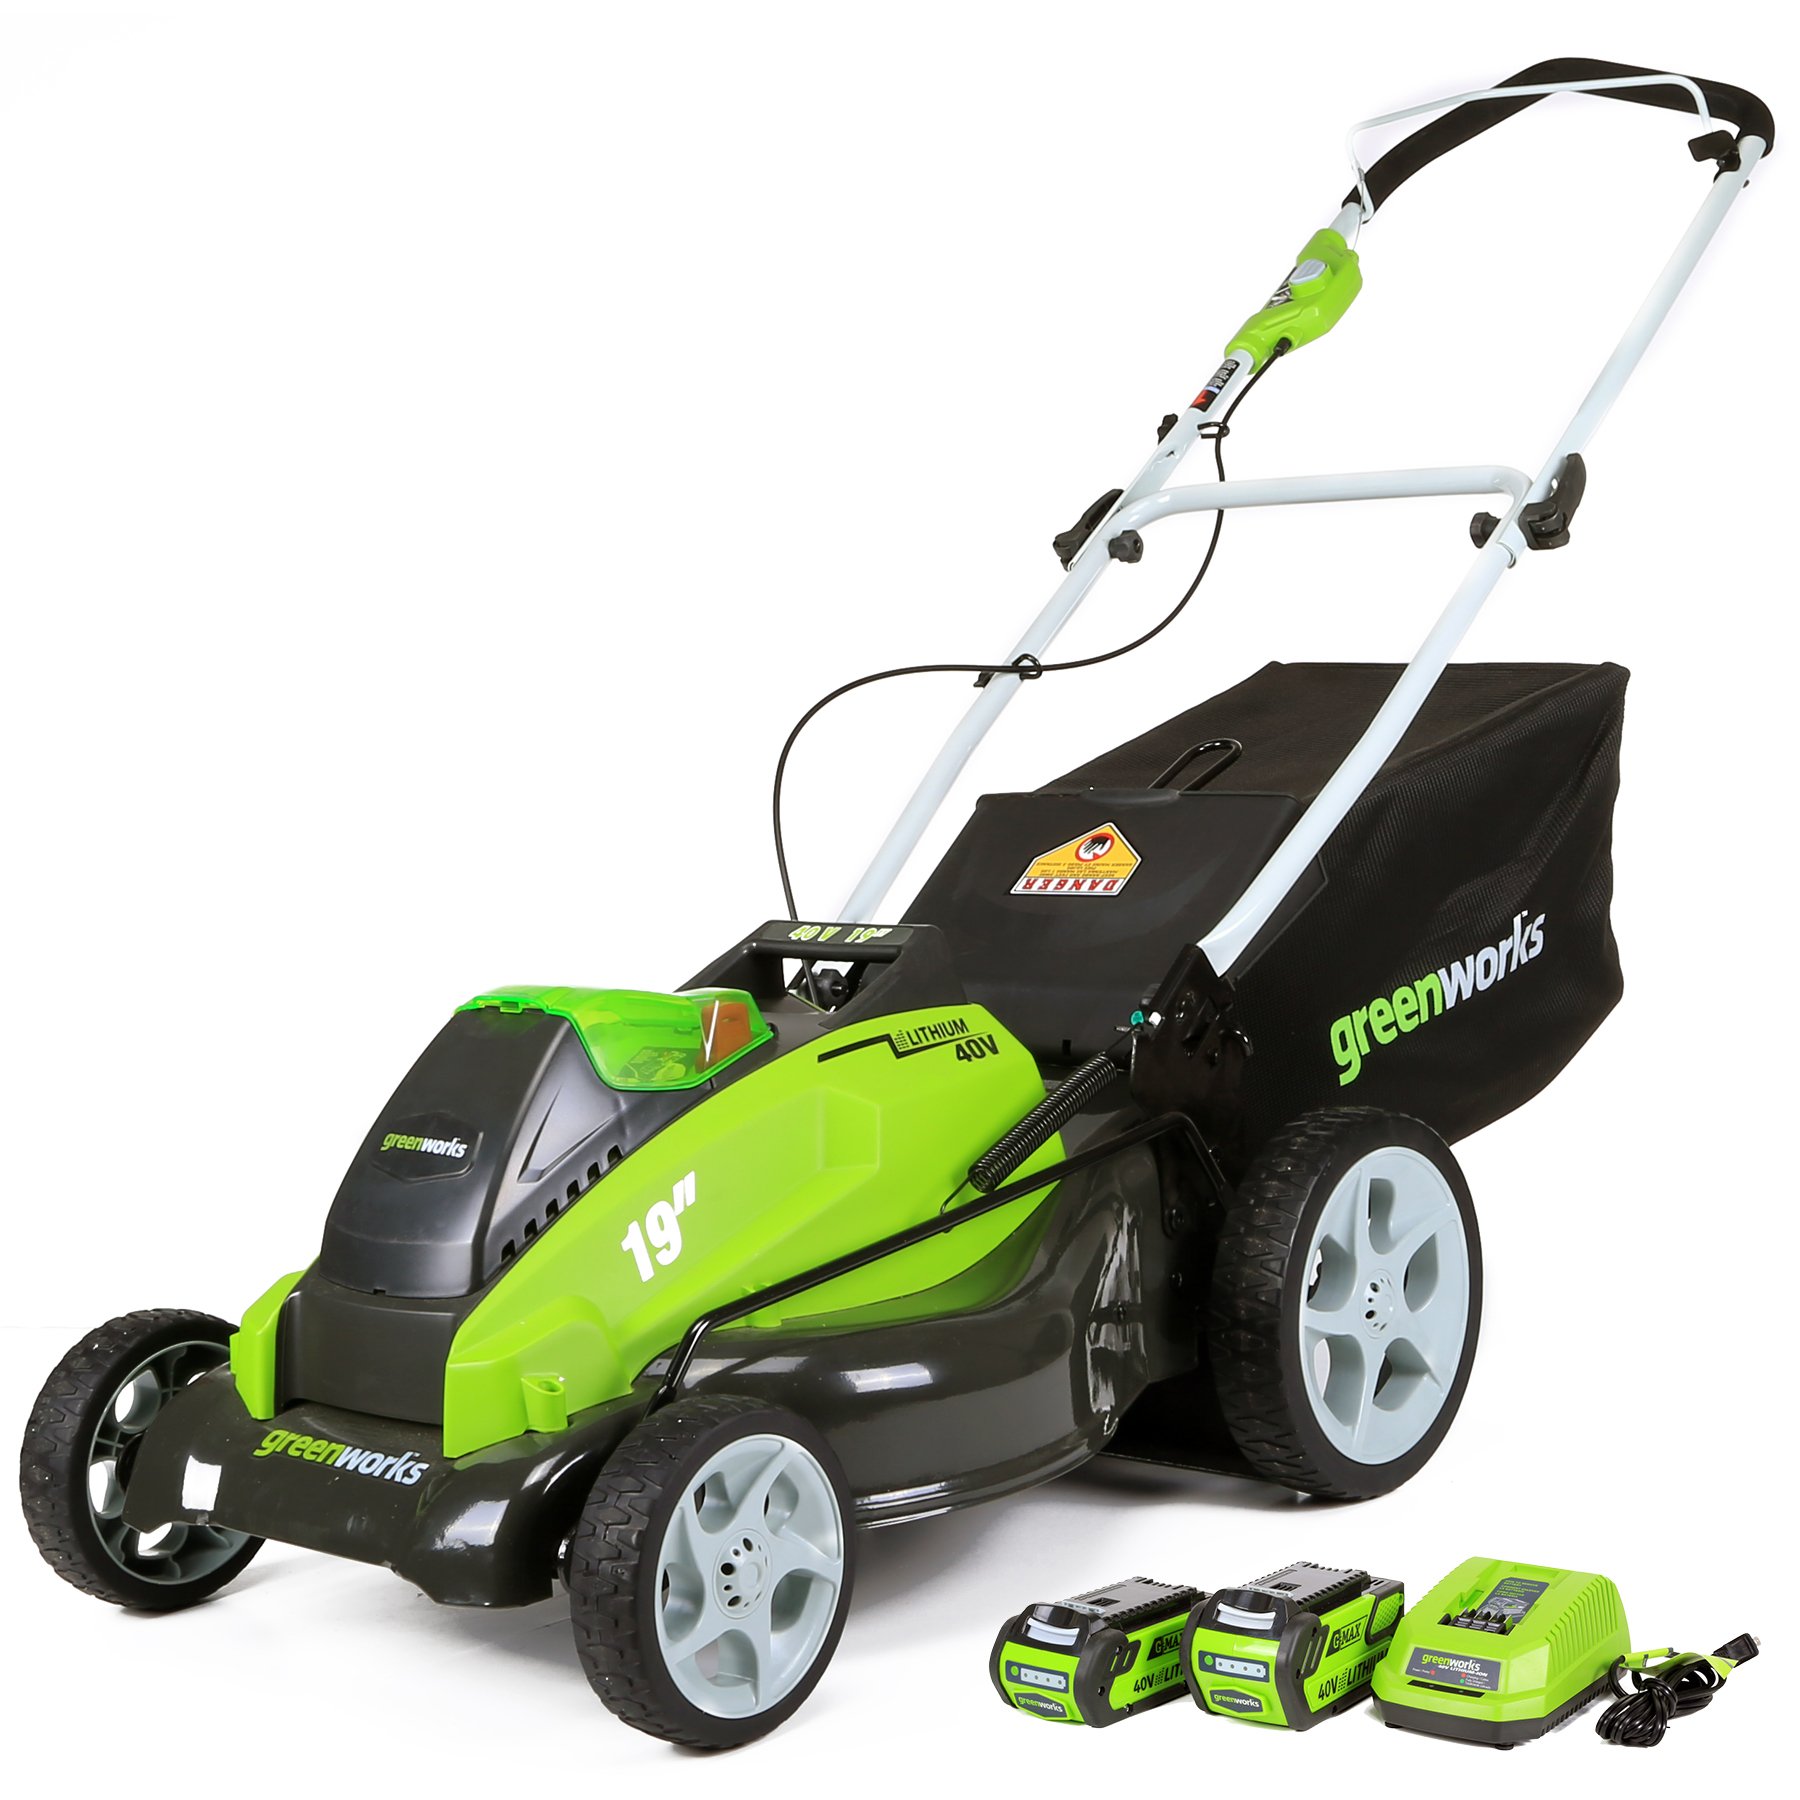 Greenworks 40V 19-Inch Cordless (3-In-1) Push 20% OFF Lawn Mower, 4.0Ah + 2.0Ah Battery and Charger Included 25223 - $275.39 at Amazon